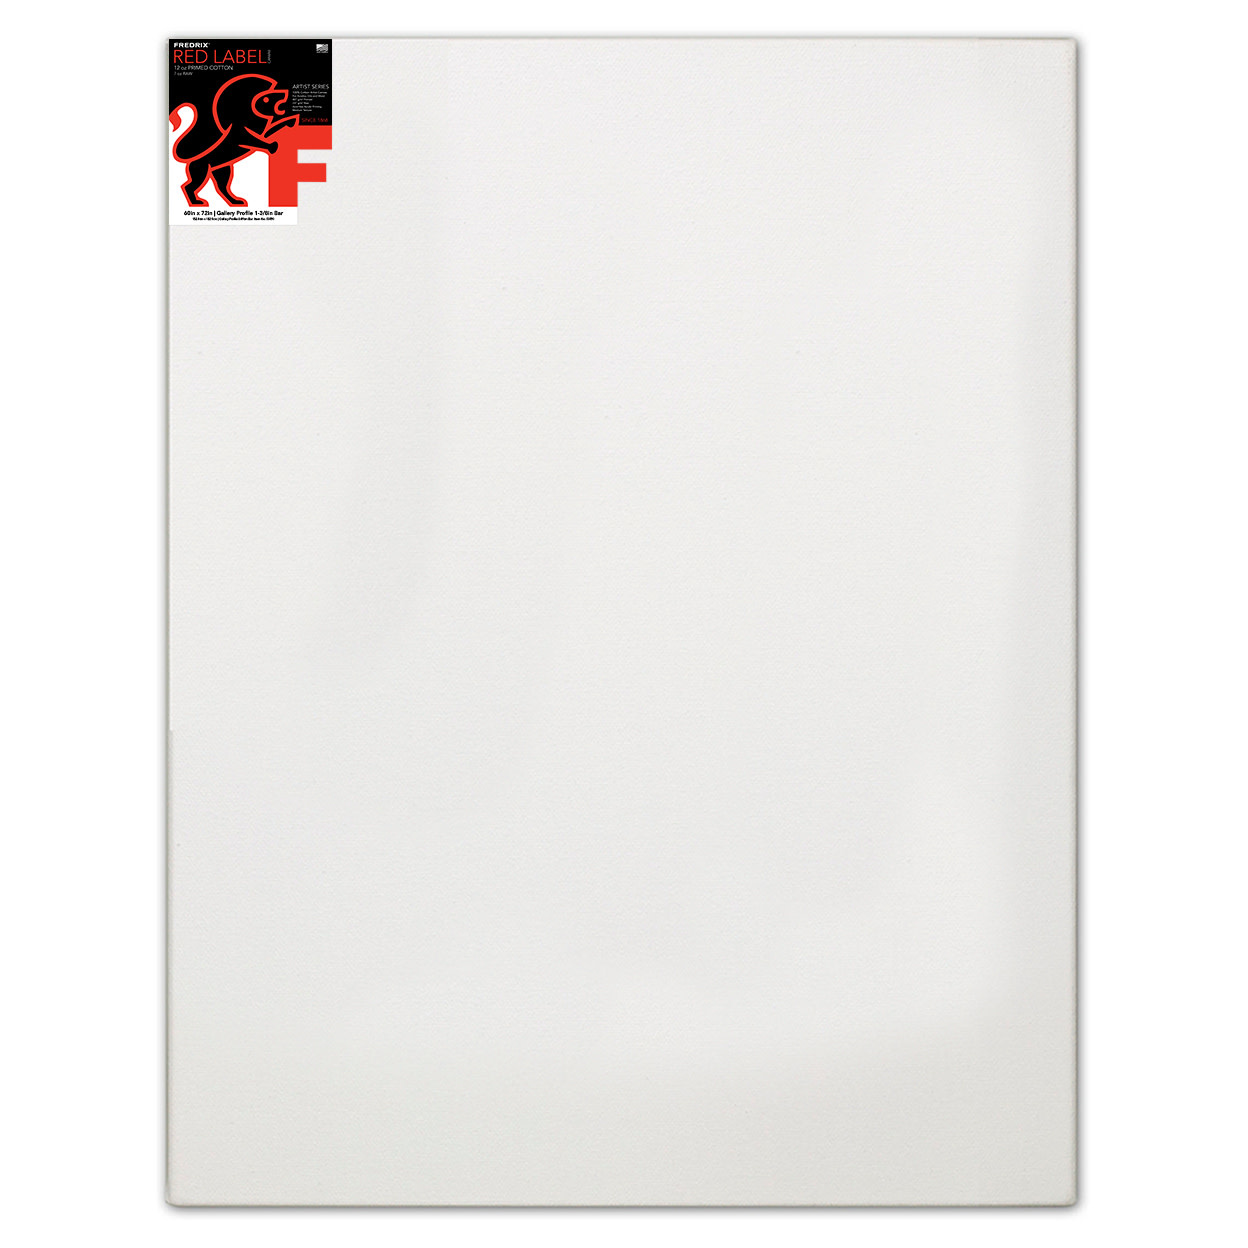 Fredrix Artist Series Red Label 12 oz. Primed Cotton Stretched Canvas, 1-3/8" Gallery Profile, 60" x 72"